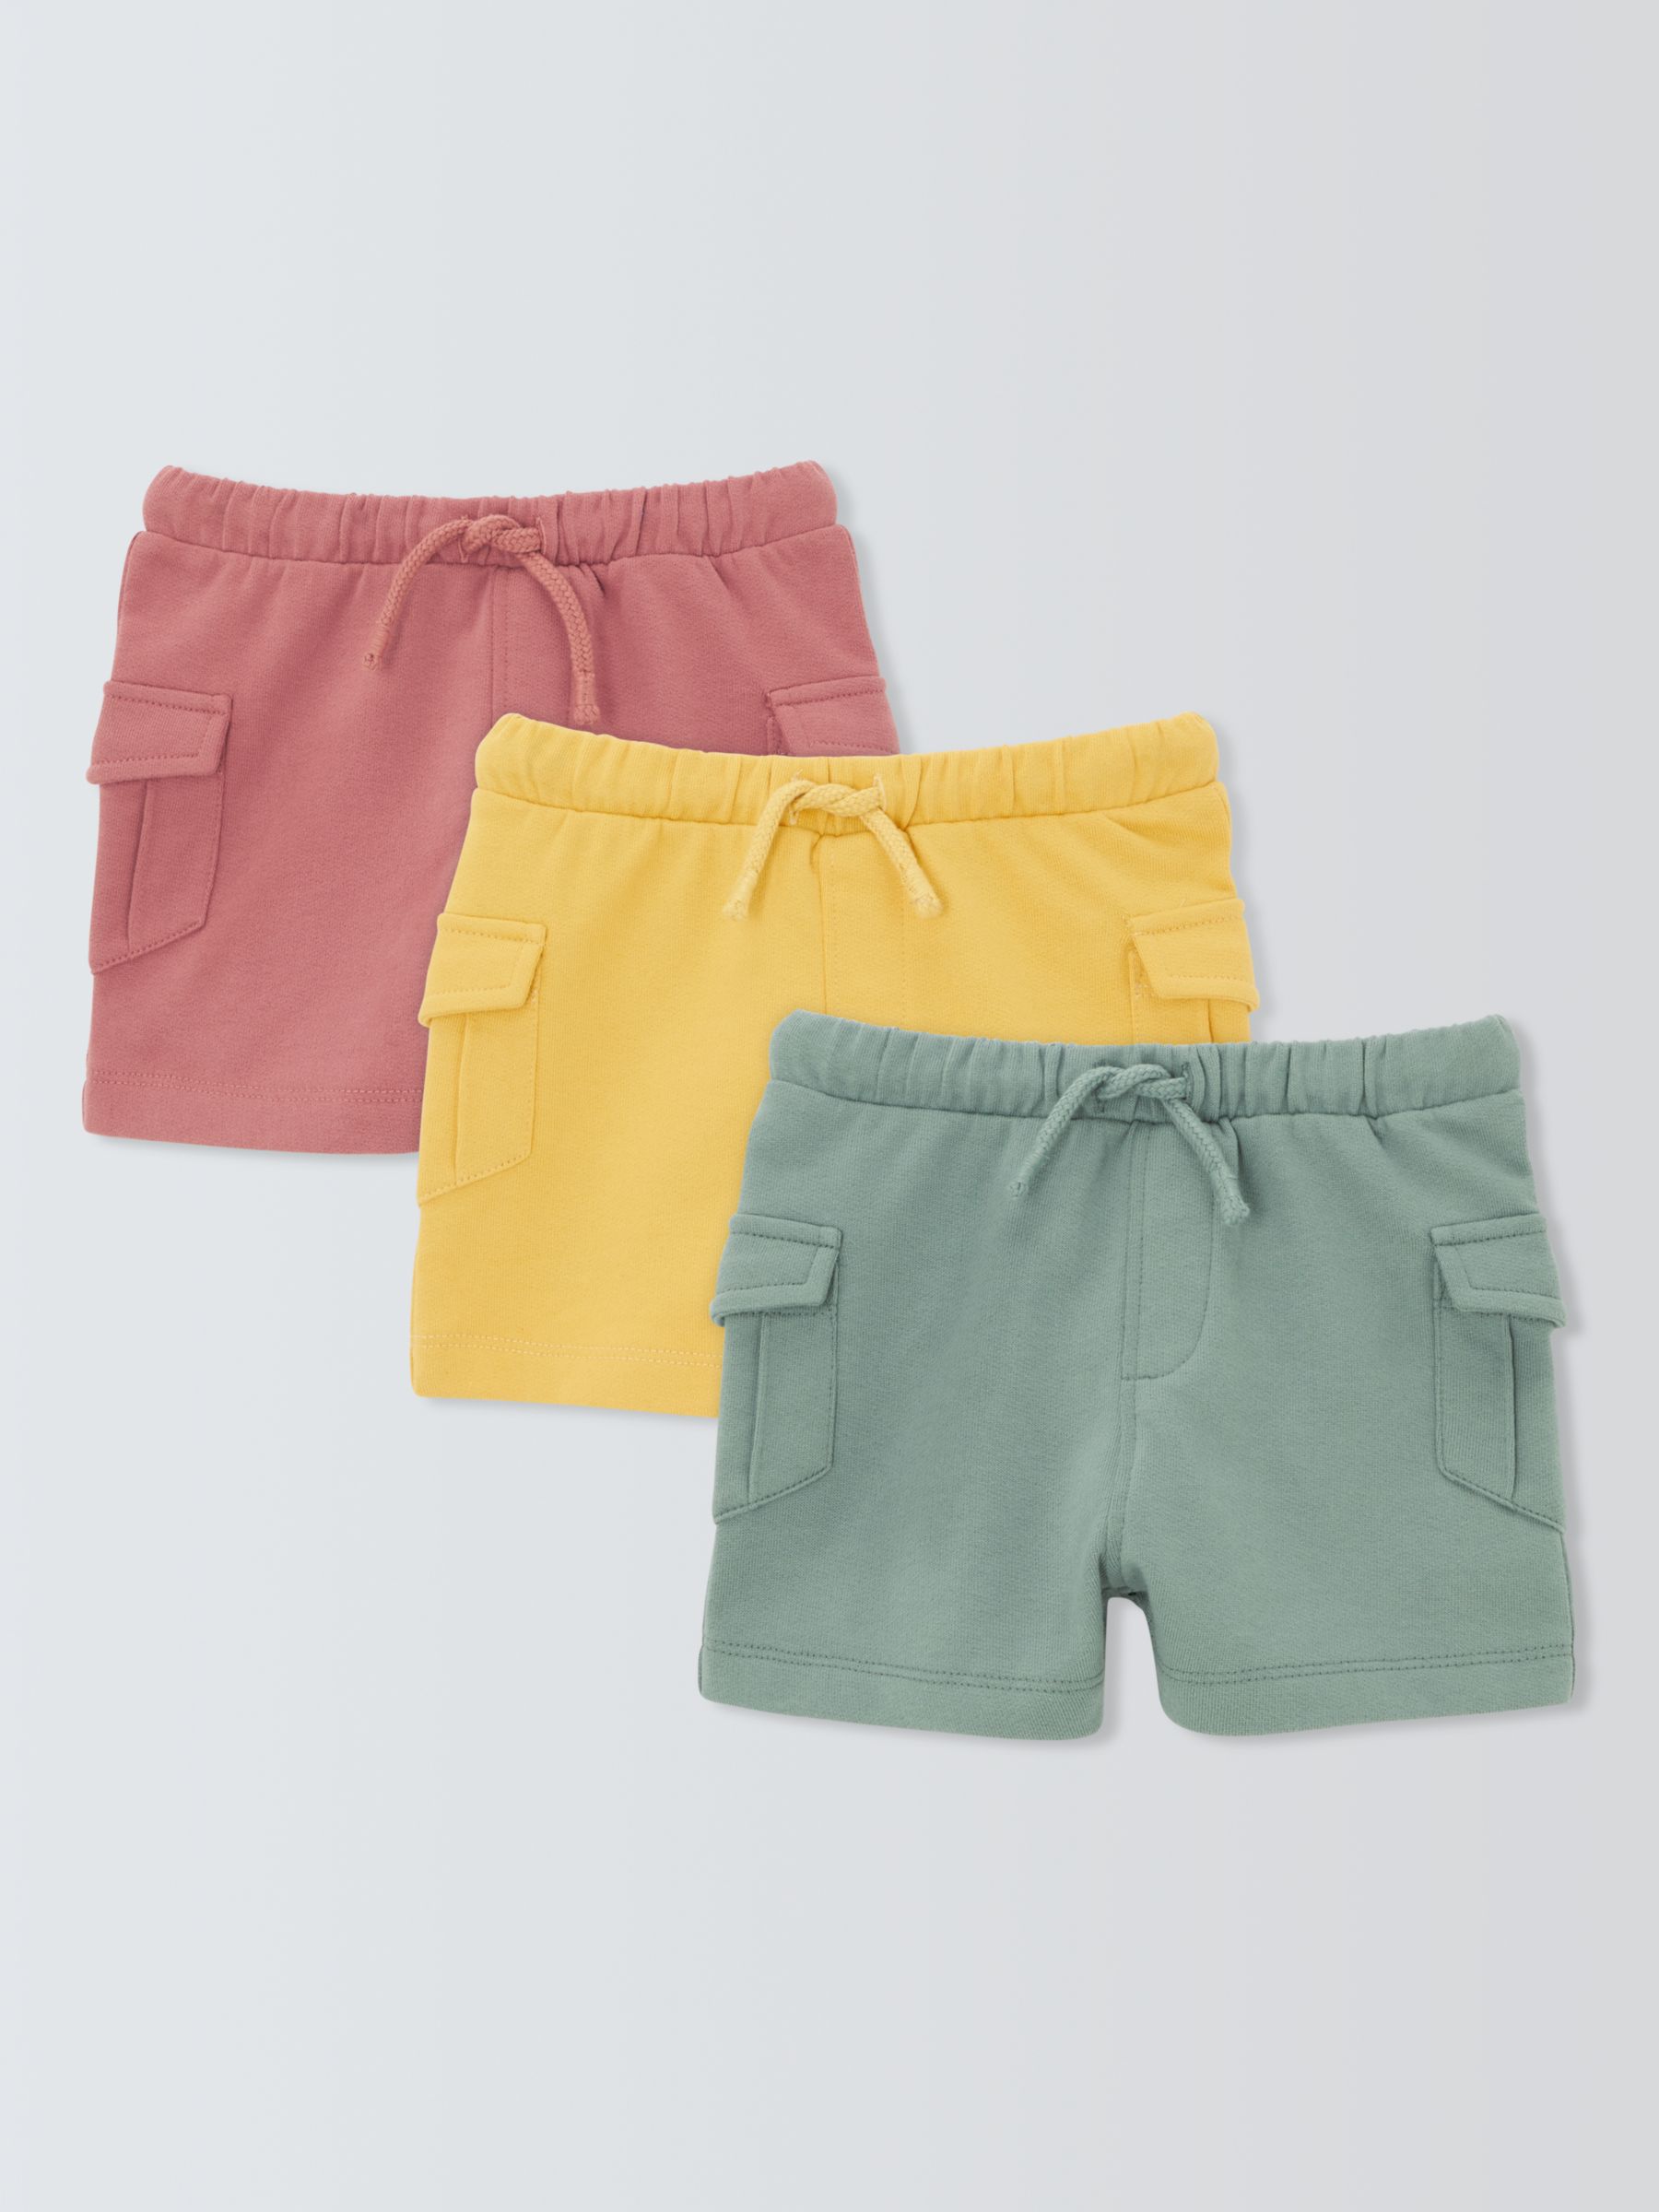 John Lewis Baby Cotton Shorts, Pack of 3, Multi, 6-9 months